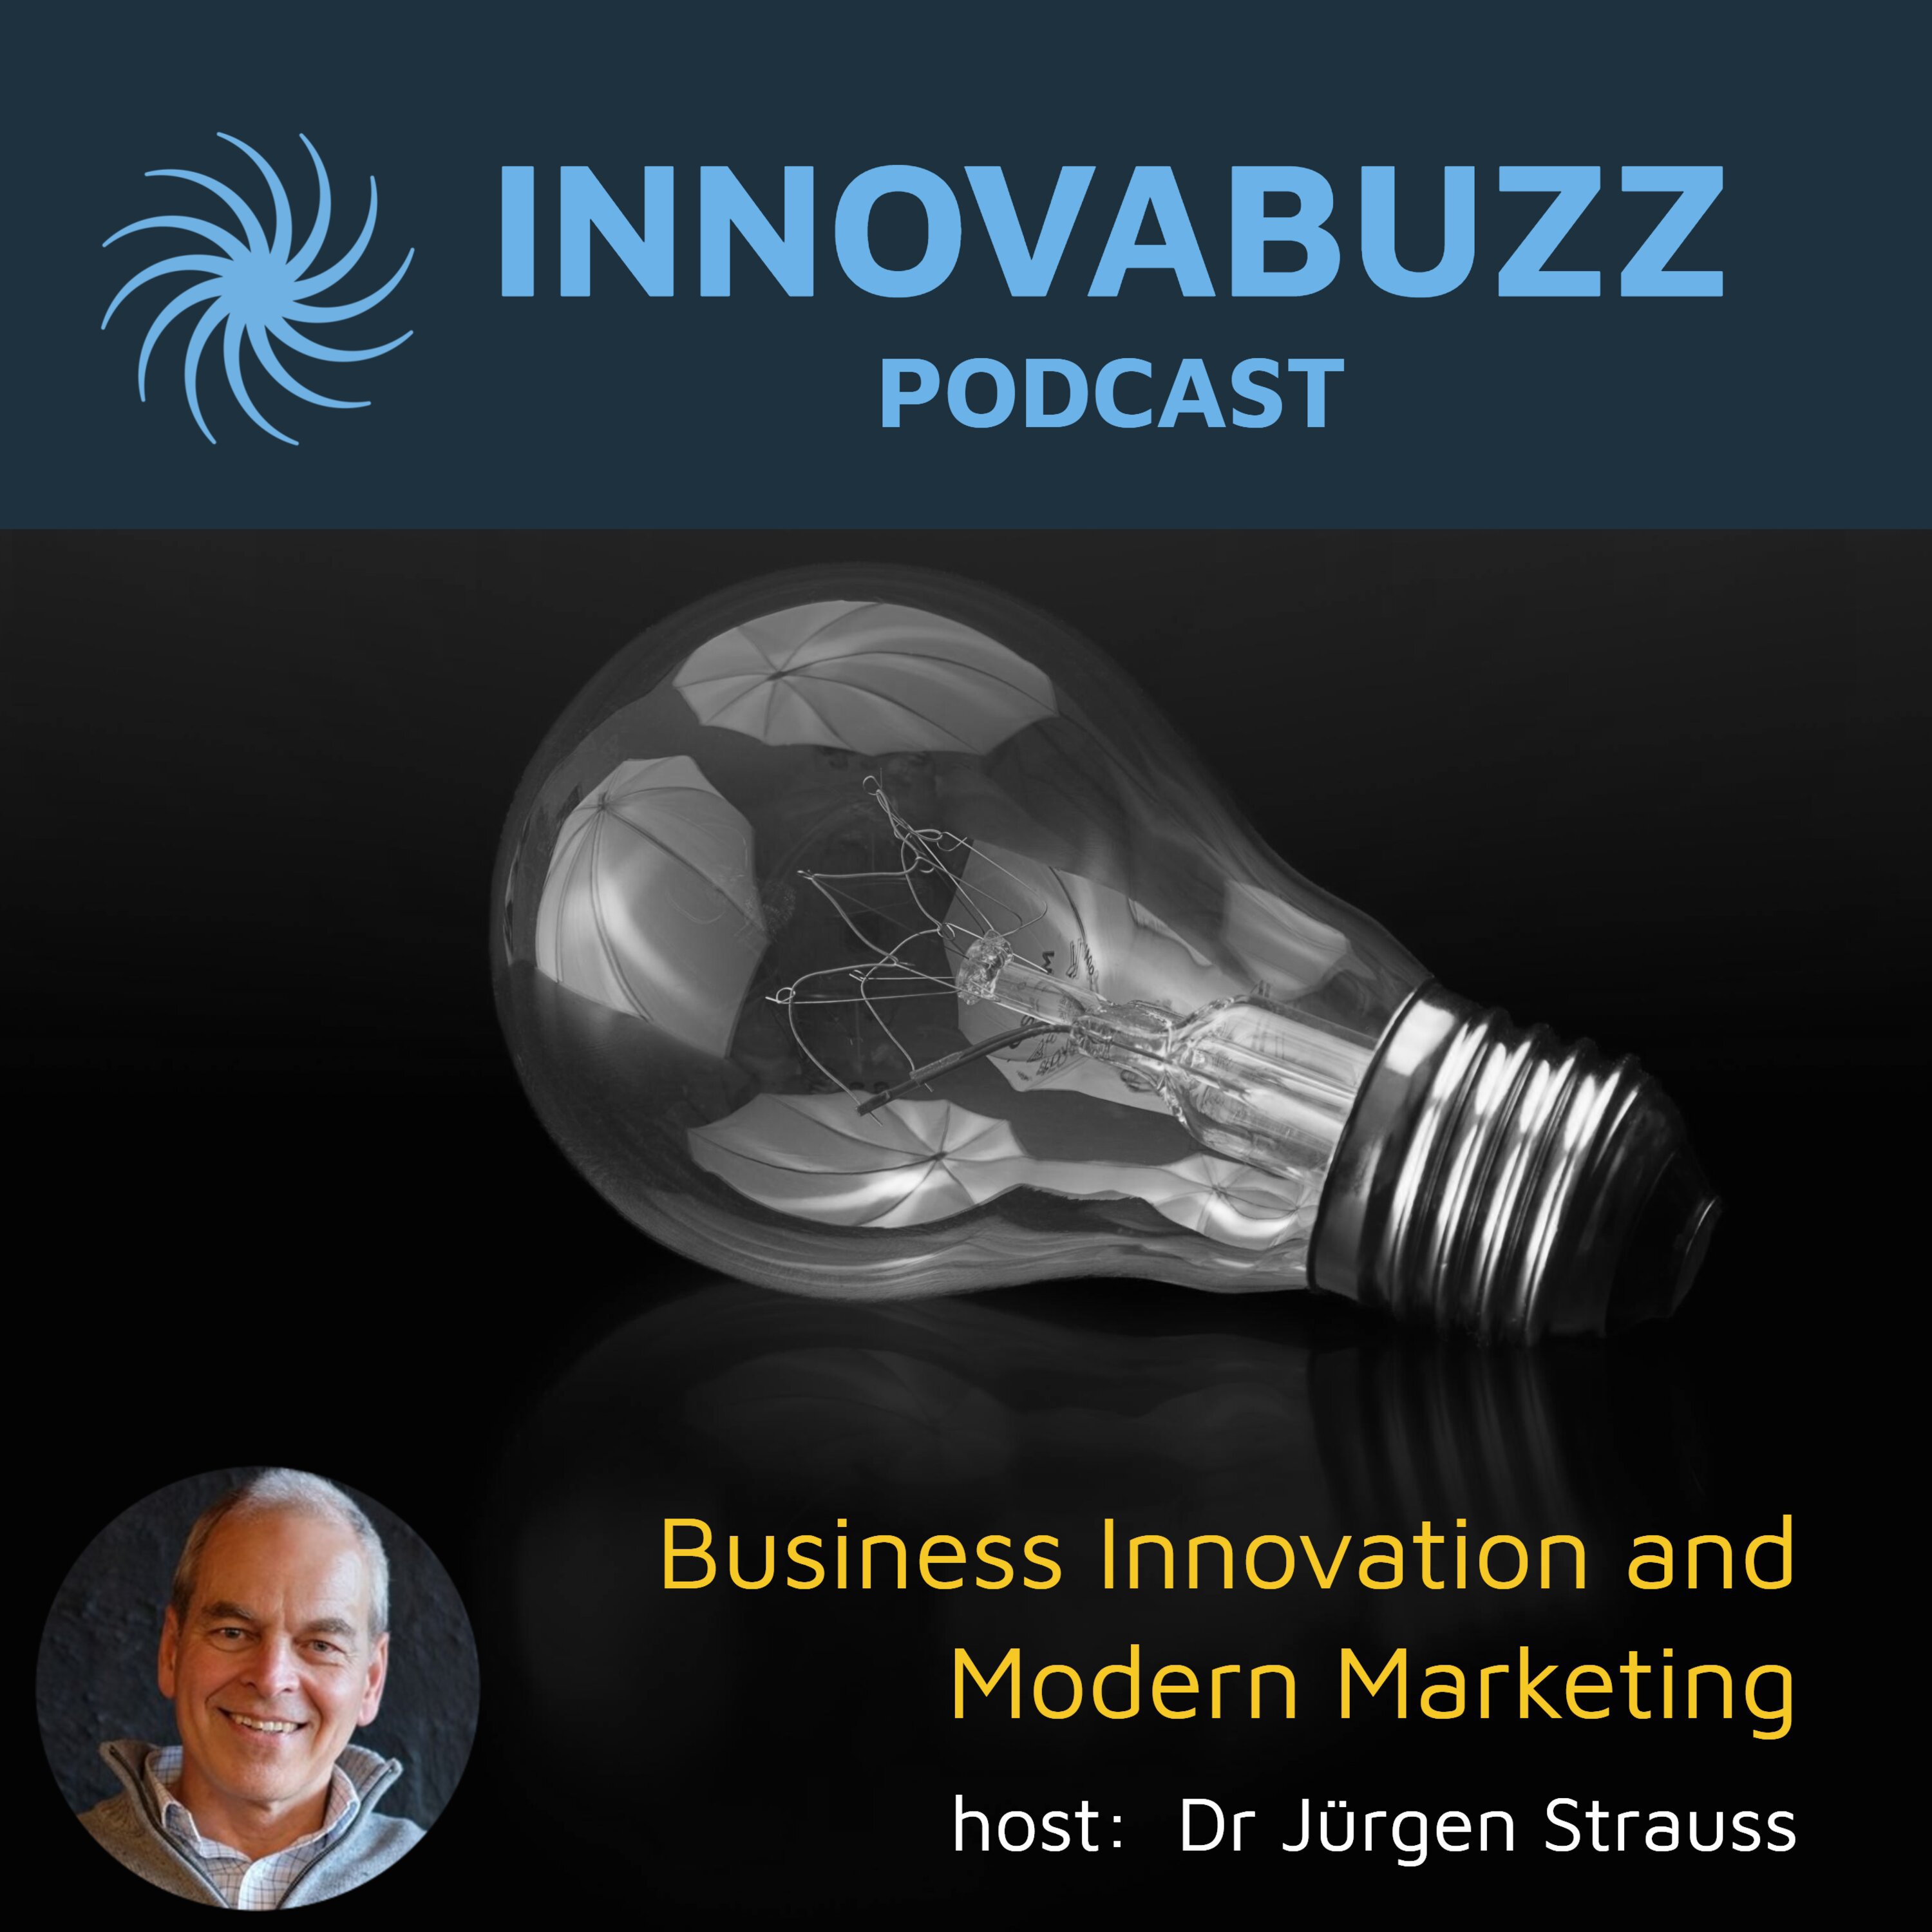 A highlight from Steffen Hedebrandt, How to Use Data to Understand Customer Journeys - InnovaBuzz 458